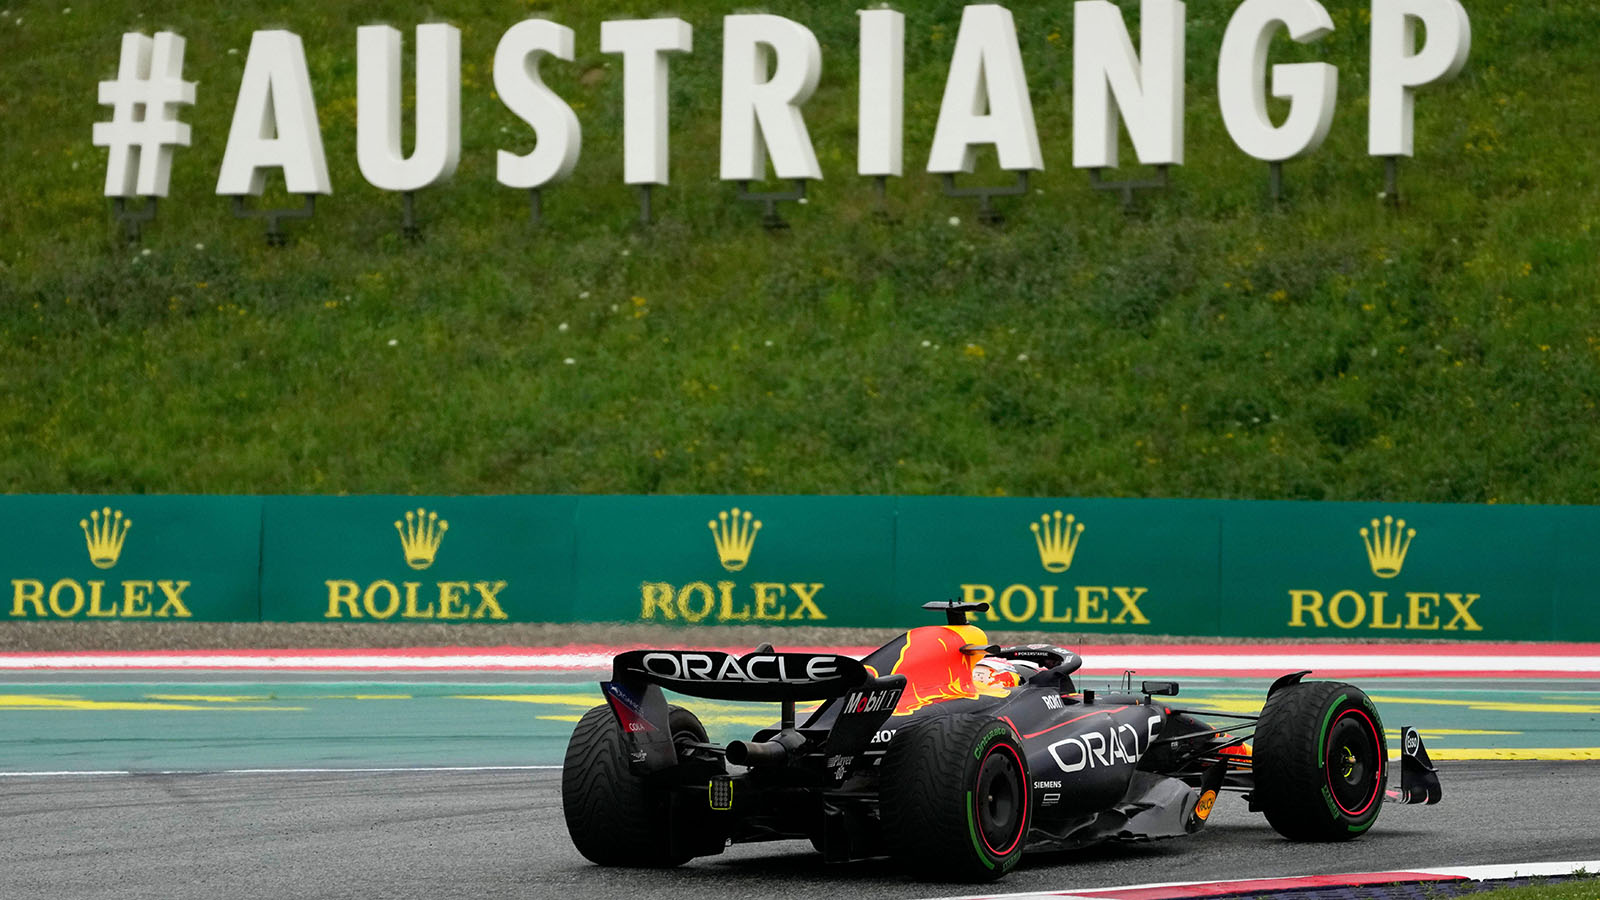 Max Verstappen takes a curve during the sprint race ahead of Sunday's Formula One Austrian Grand Prix at the Red Bull Ring.